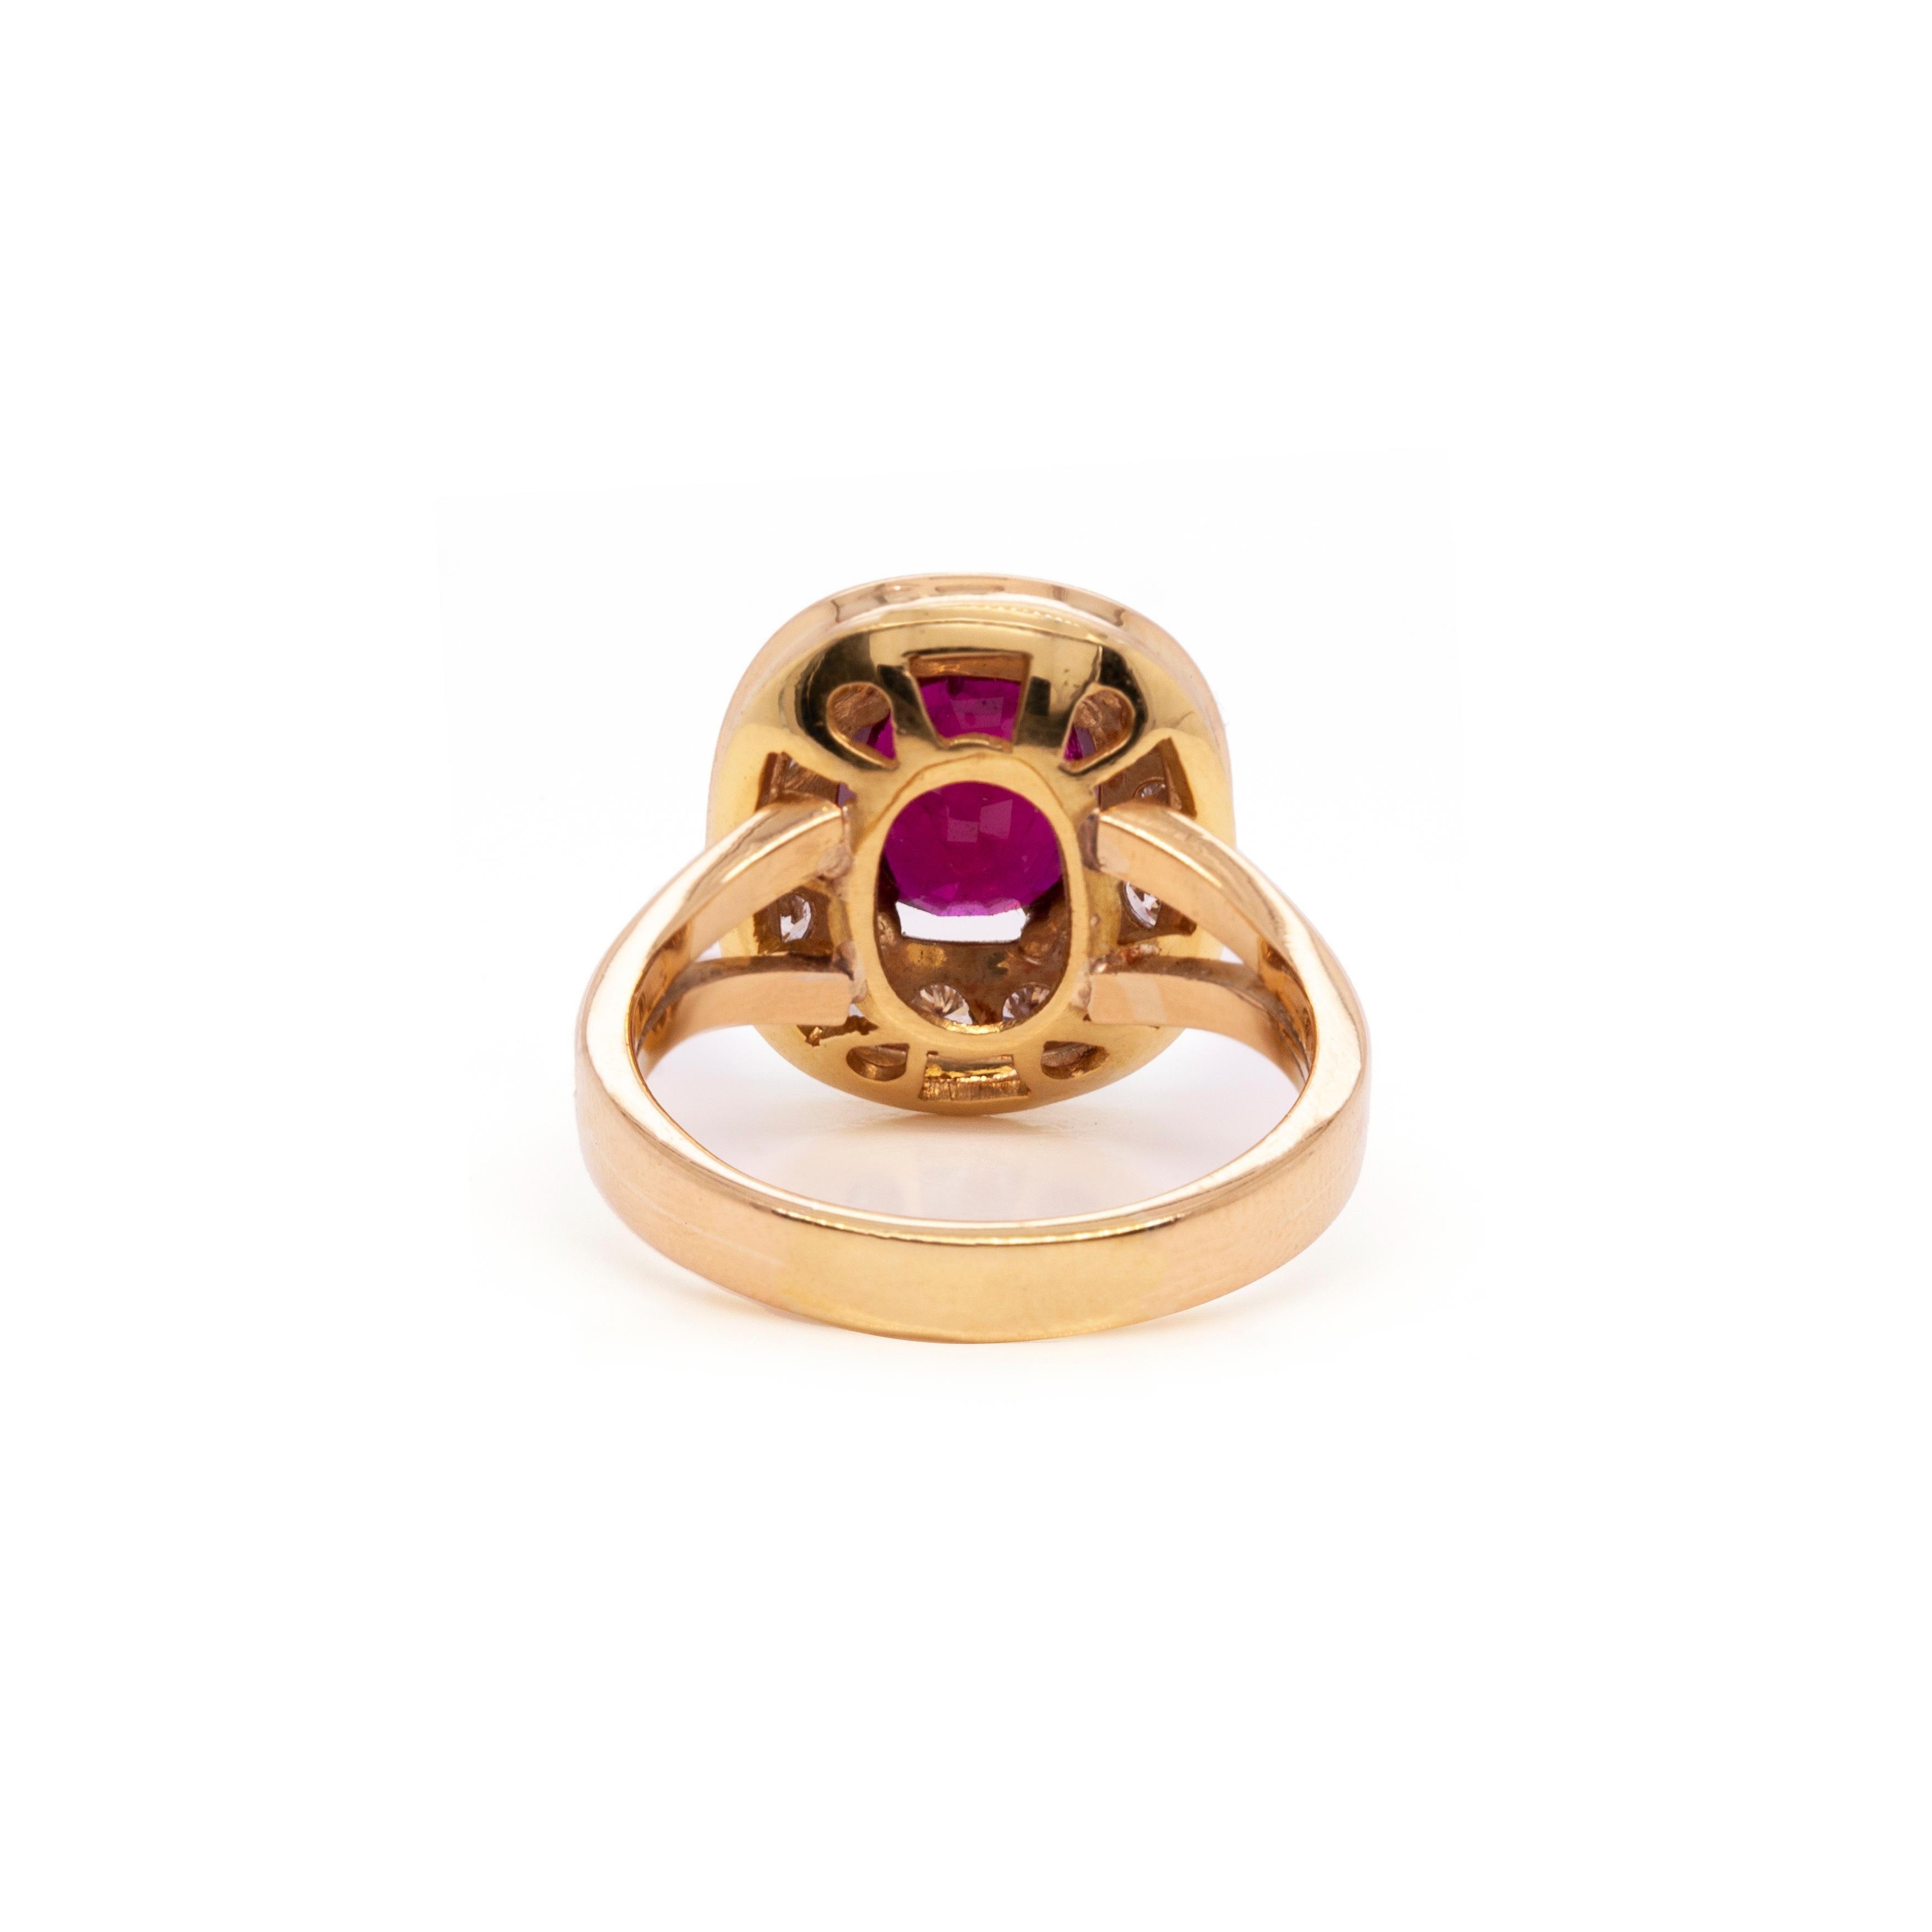 Exuding an elegant and timeless beauty, this charming piece will make the perfect ruby and diamond engagement ring.
At its heart lies a breathtaking vibrant red cushion shaped ruby, with an approximate weight of 2.40ct, mounted in a four double